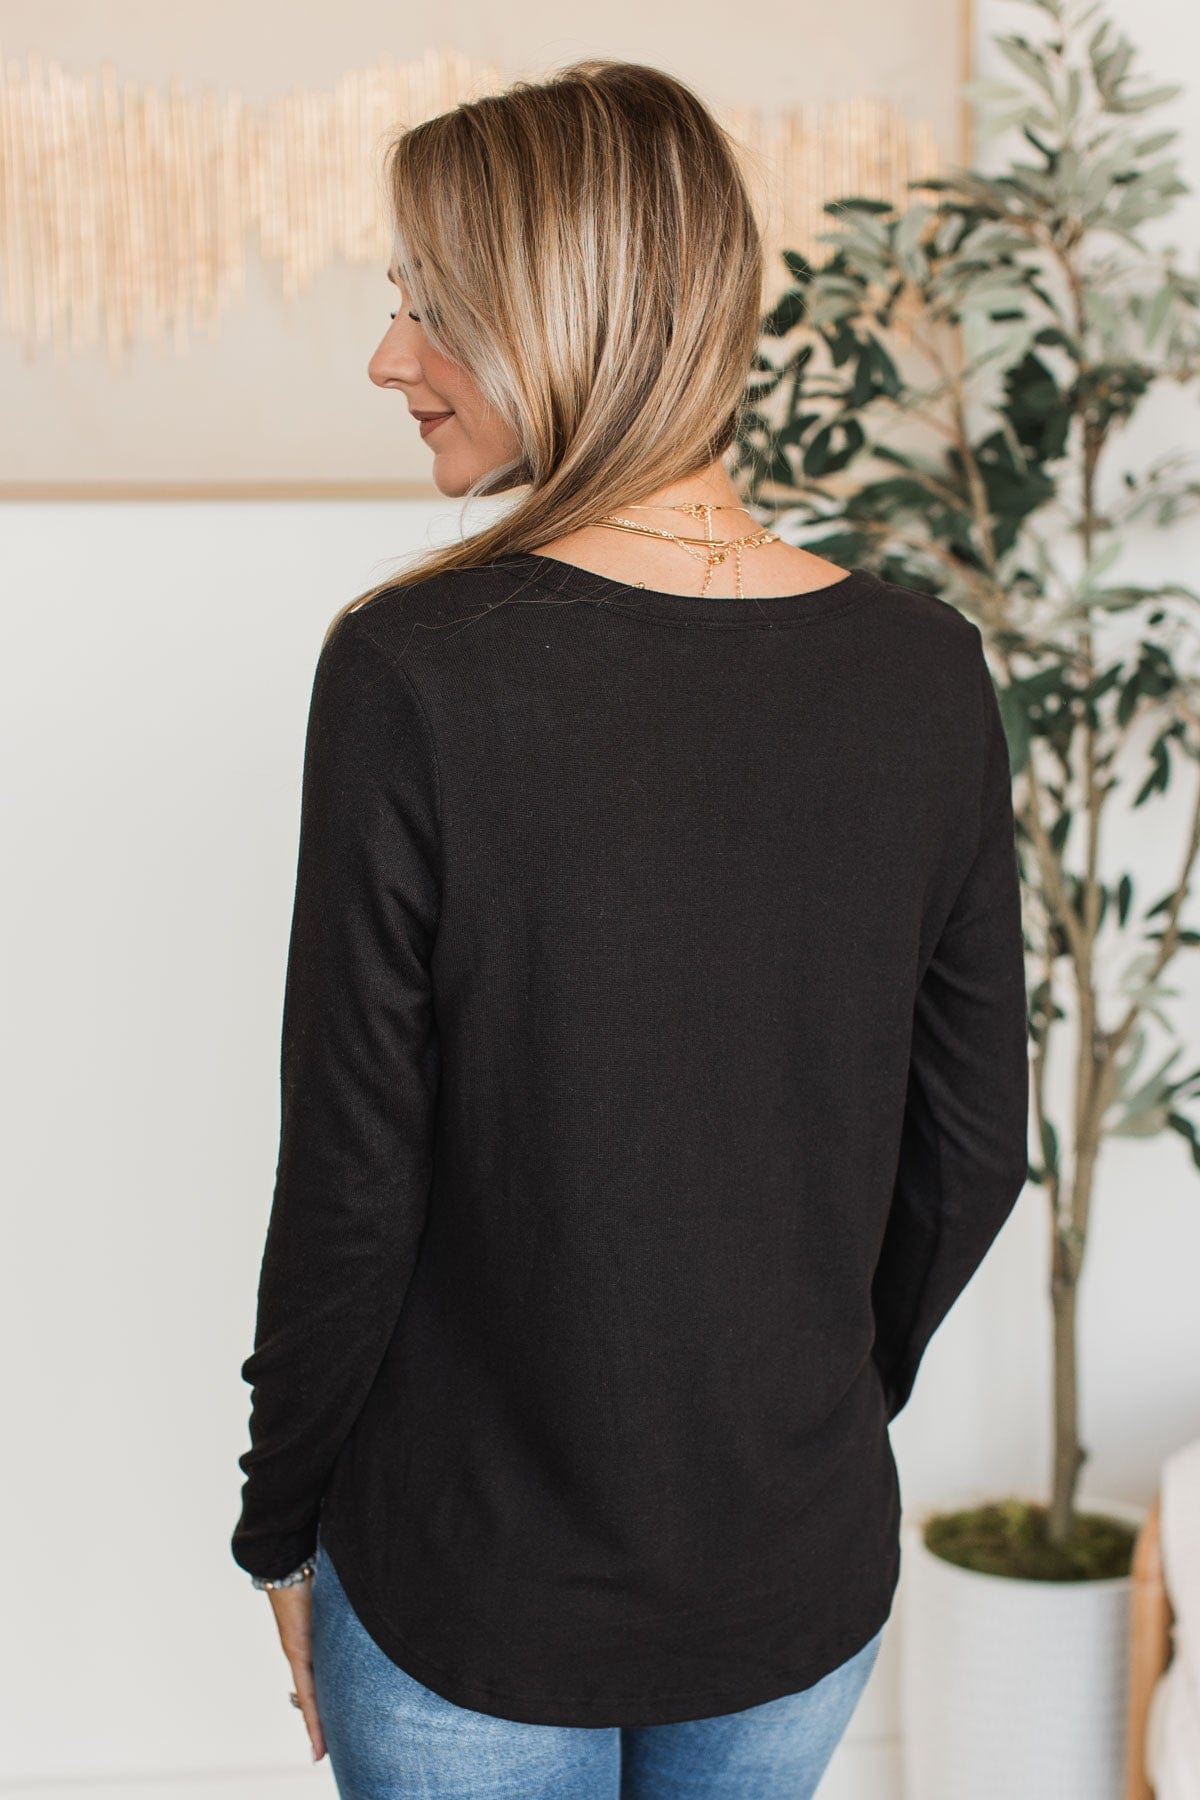 Nights Like These Knit Top- Black